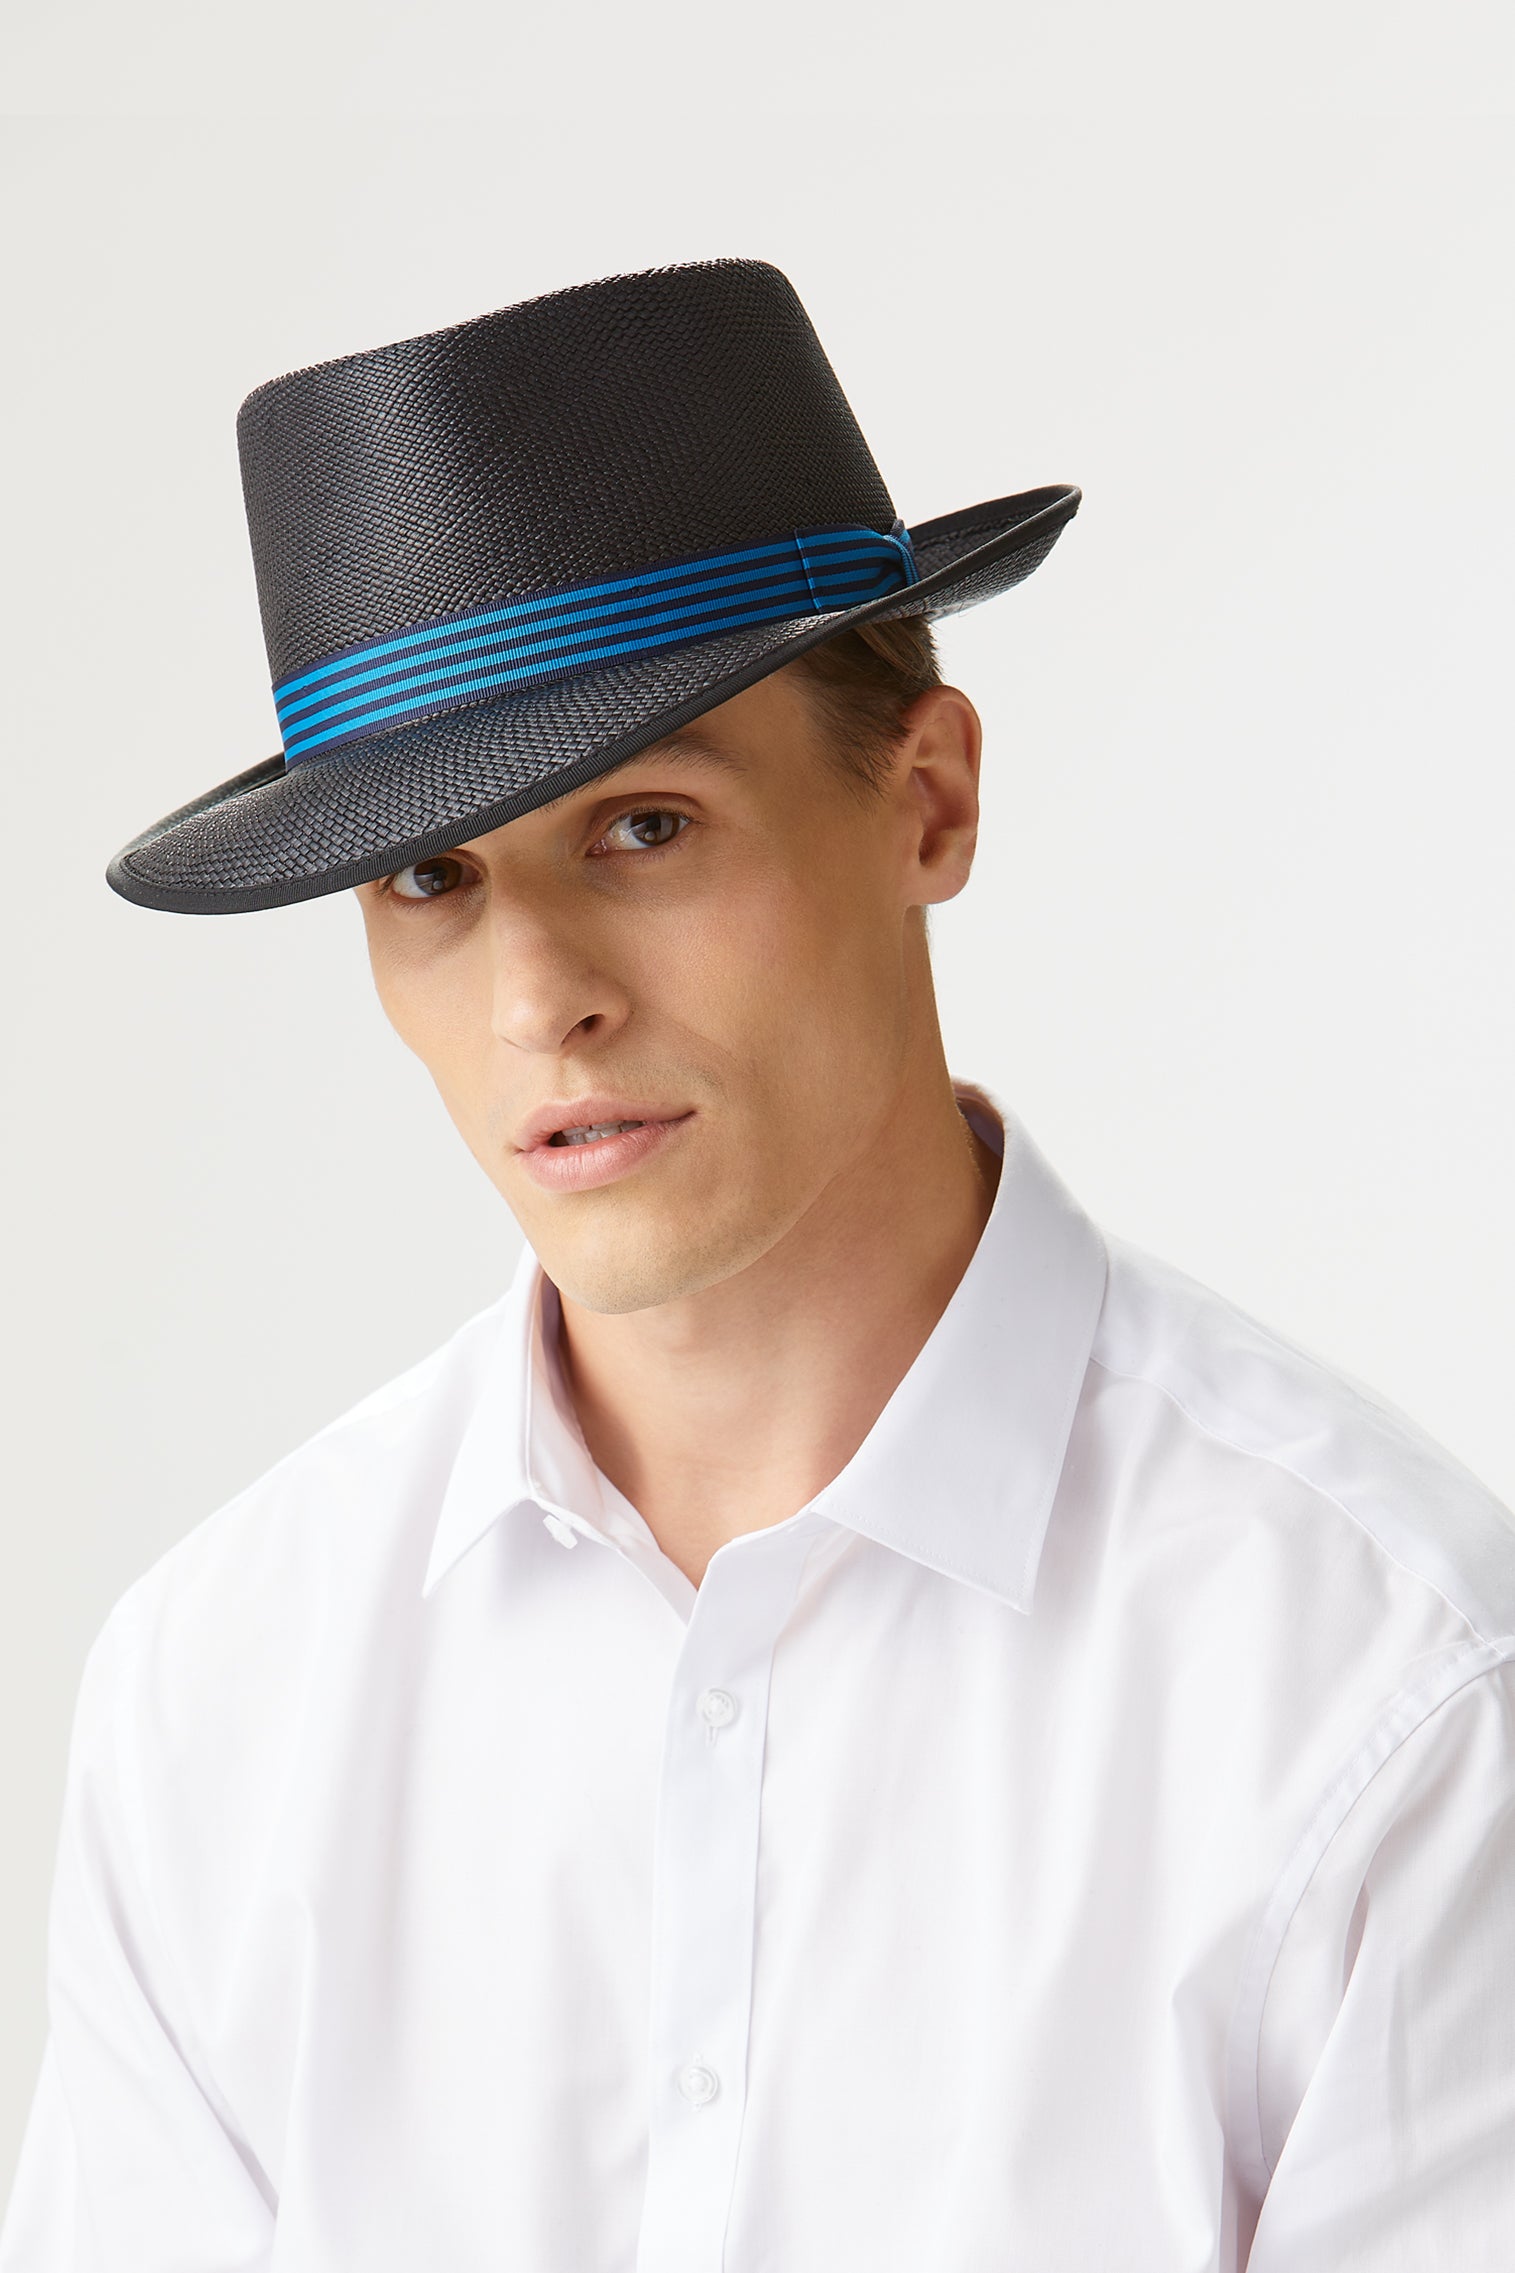 The Stoke - Panamas, Straw and Sun Hats for Men - Lock & Co. Hatters London UK